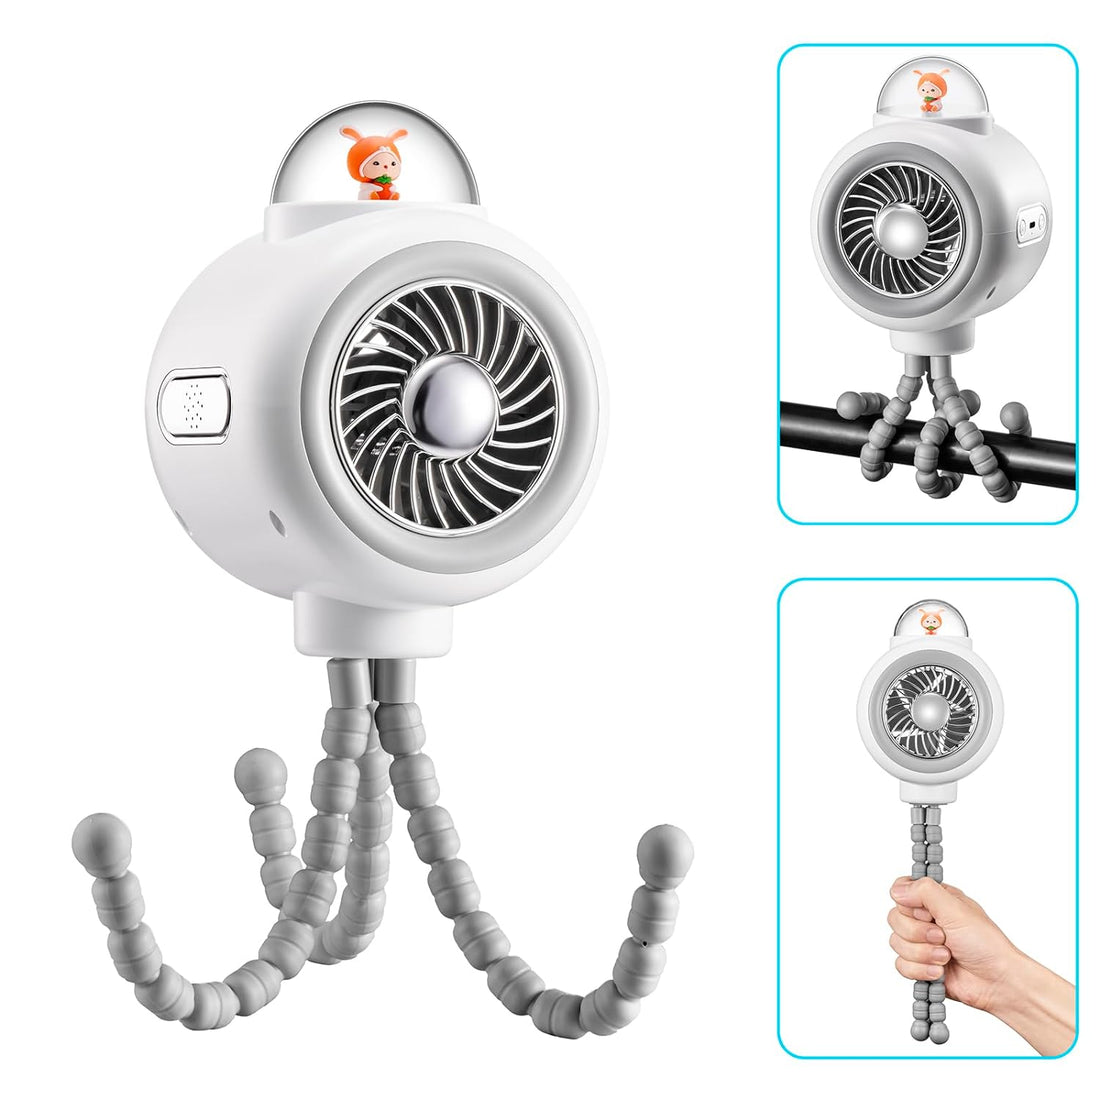 GAFres Portable Stroller Fan，Battery Operated Small Clip on Fan with 3 Speeds and Rotatable Handheld Personal Desk Cooling Fan for Car Seat Crib Treadmill Camping Travel (White)